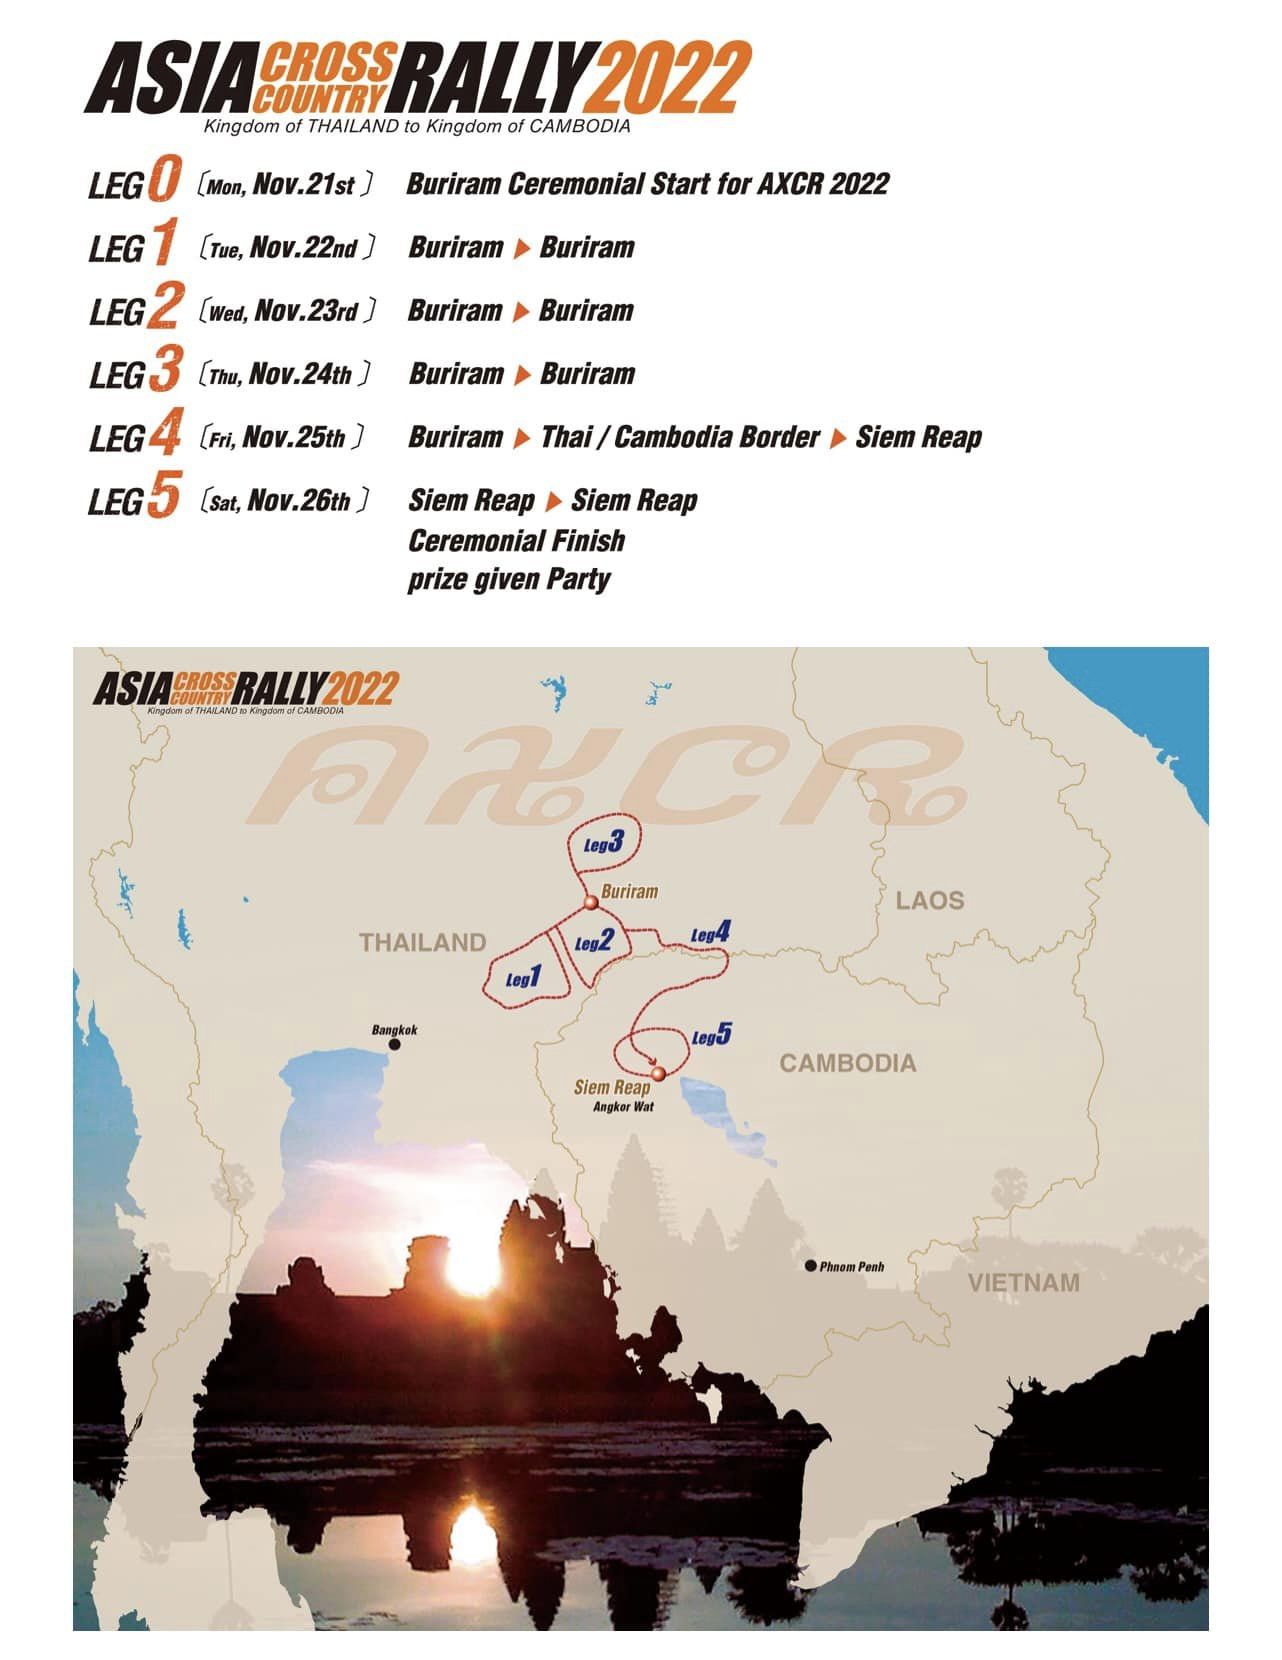 Asia Cross Country Rally 2022 schedule